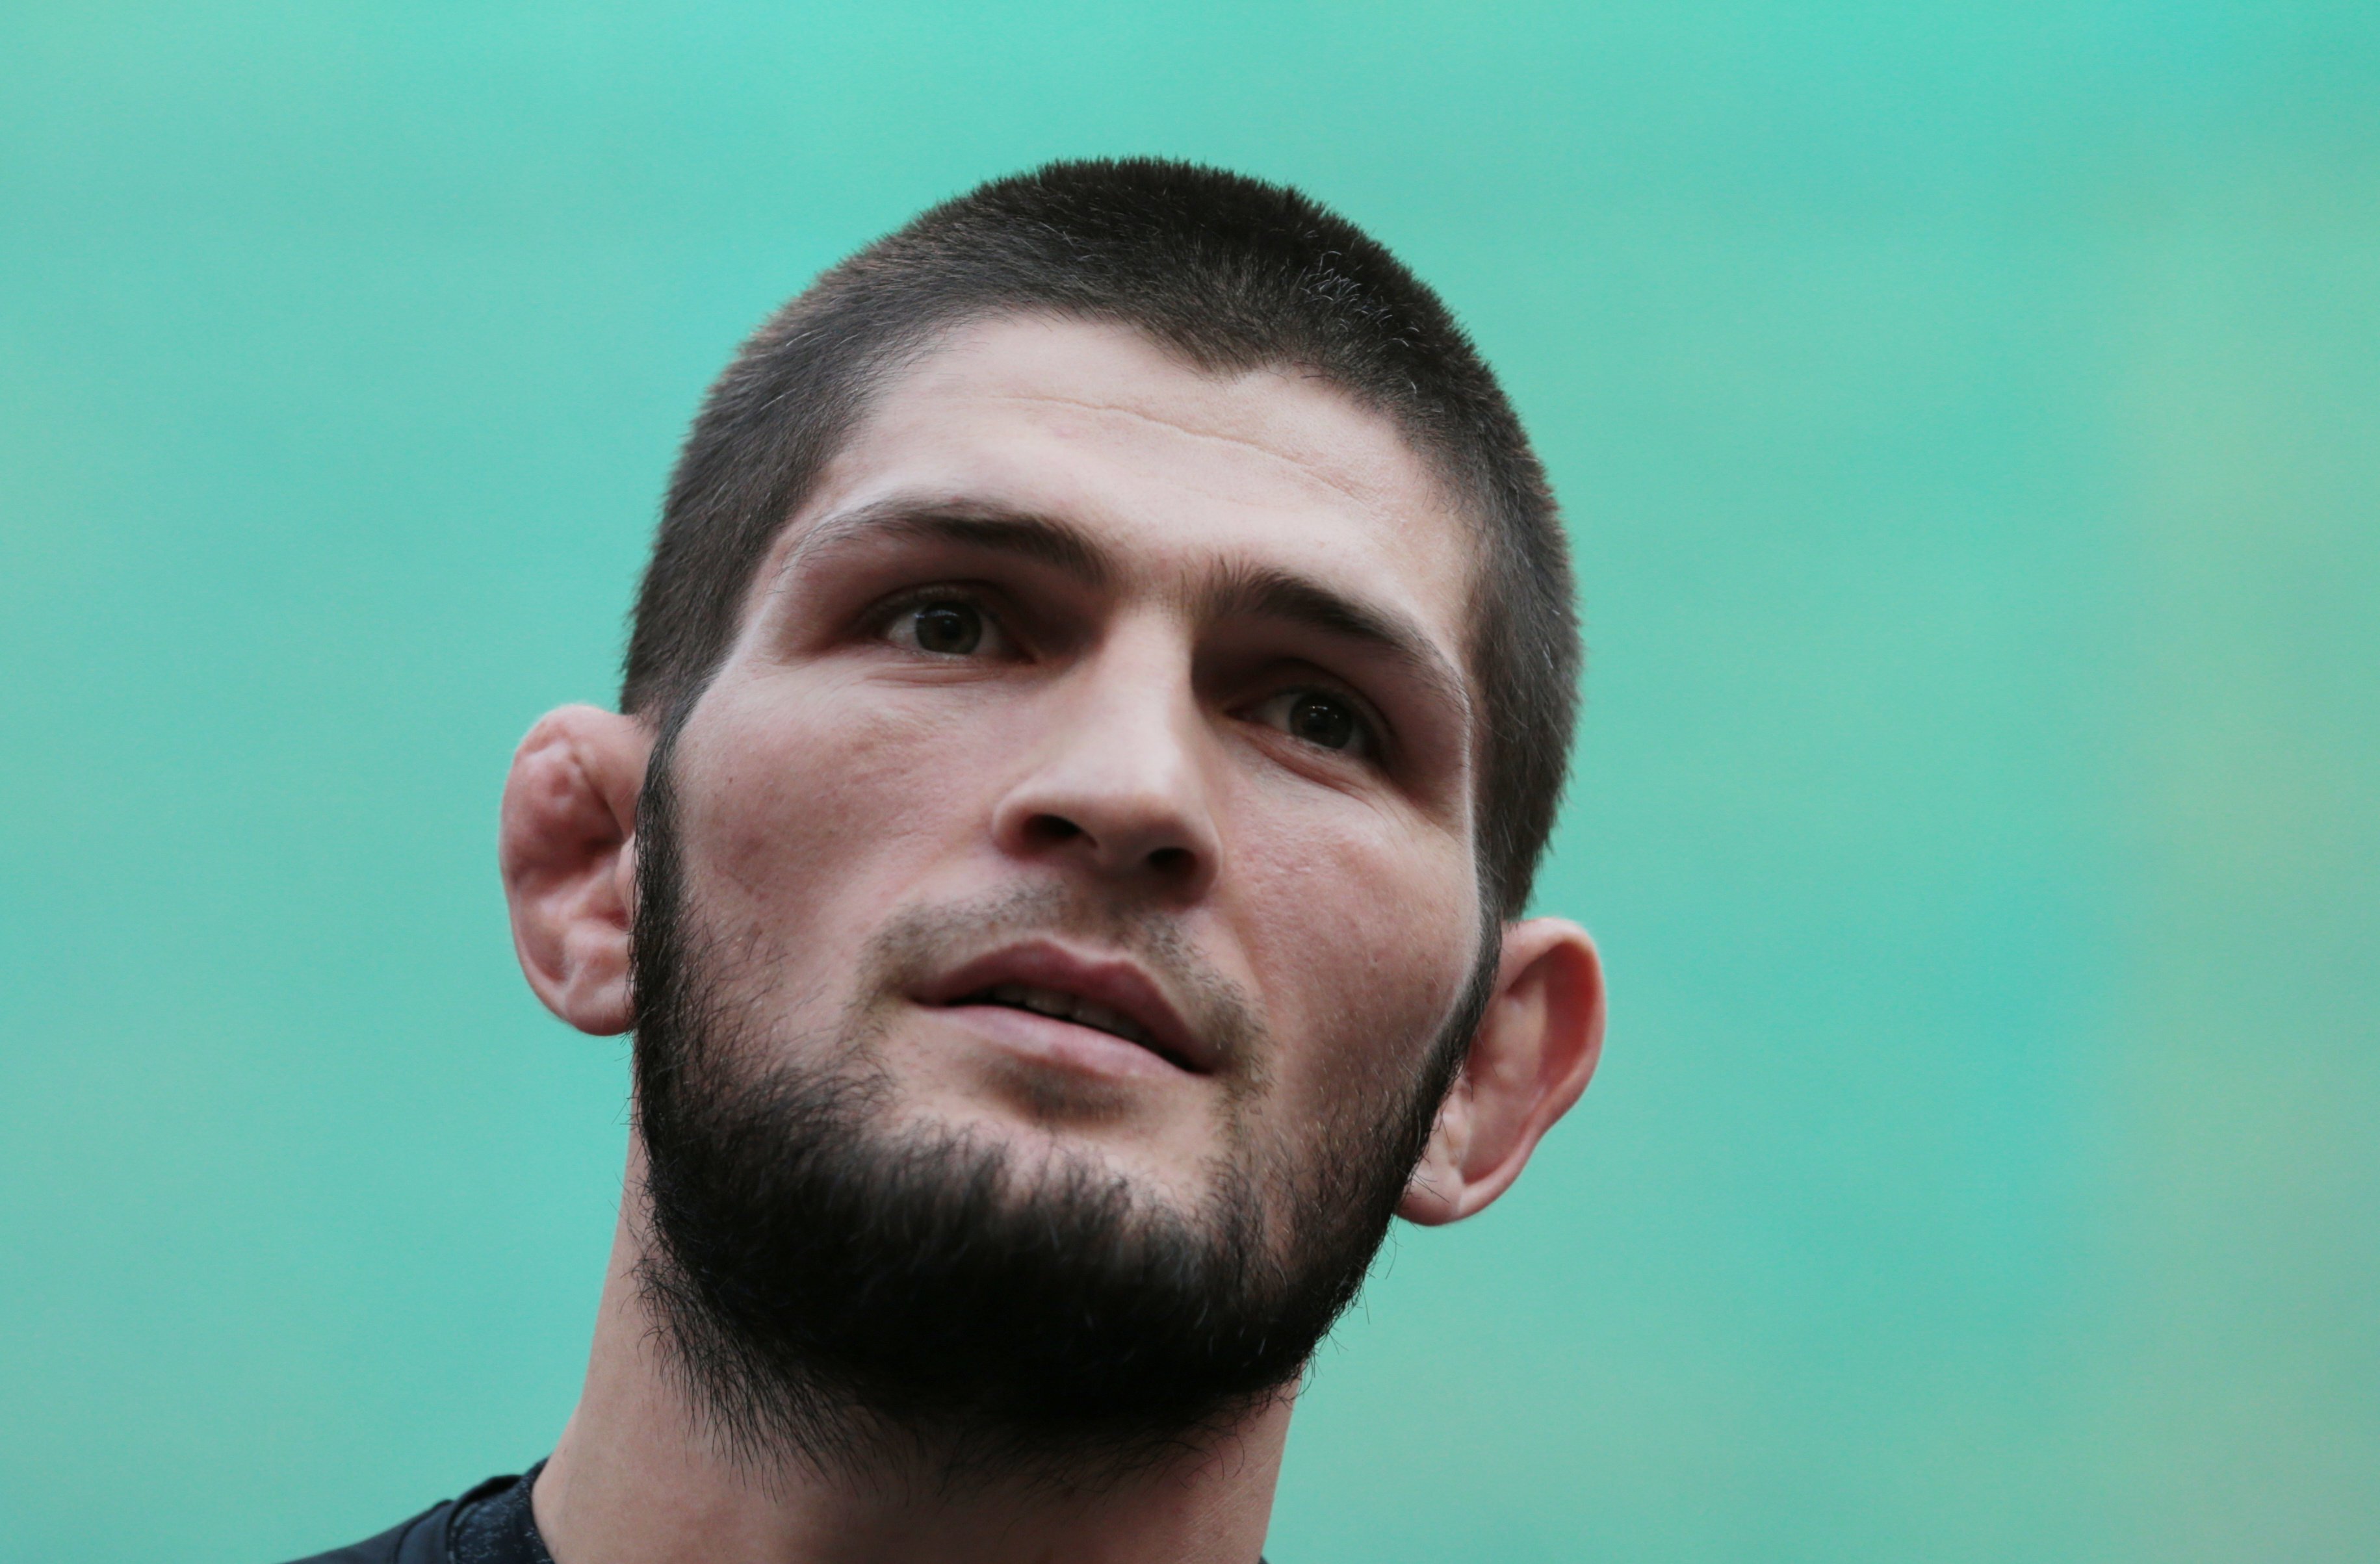 Khabib Nurmagomedov poses before his fight with Justin Gaethje. Photo: REUTERS/Christopher Pike